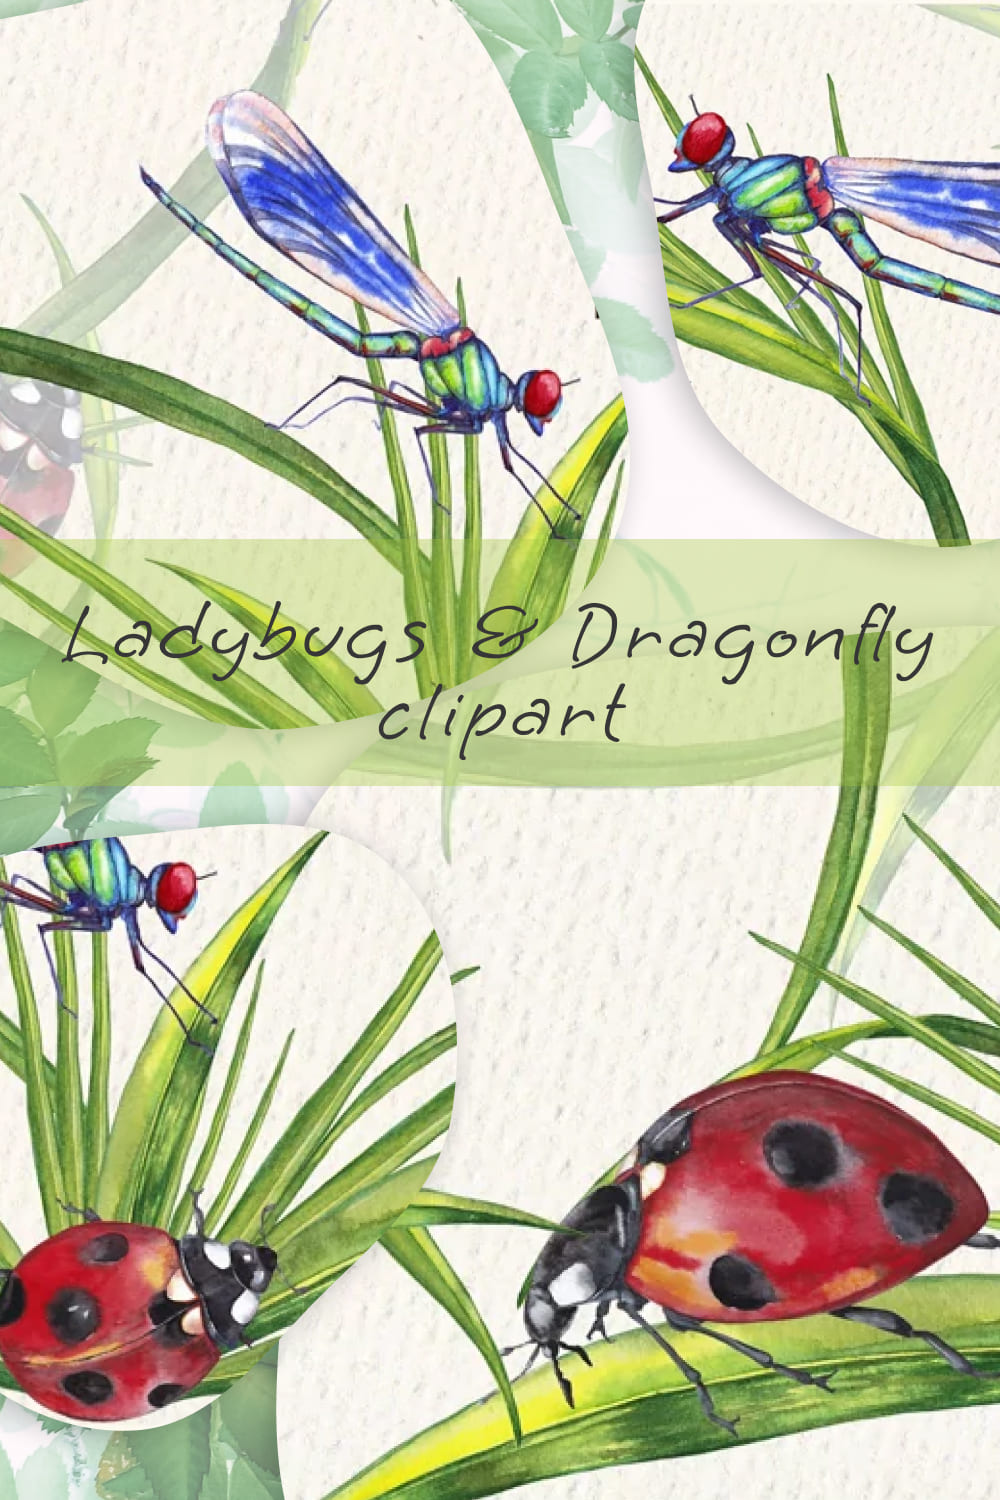 Ladybugs dragonfly clipart - Pinterest image preview.